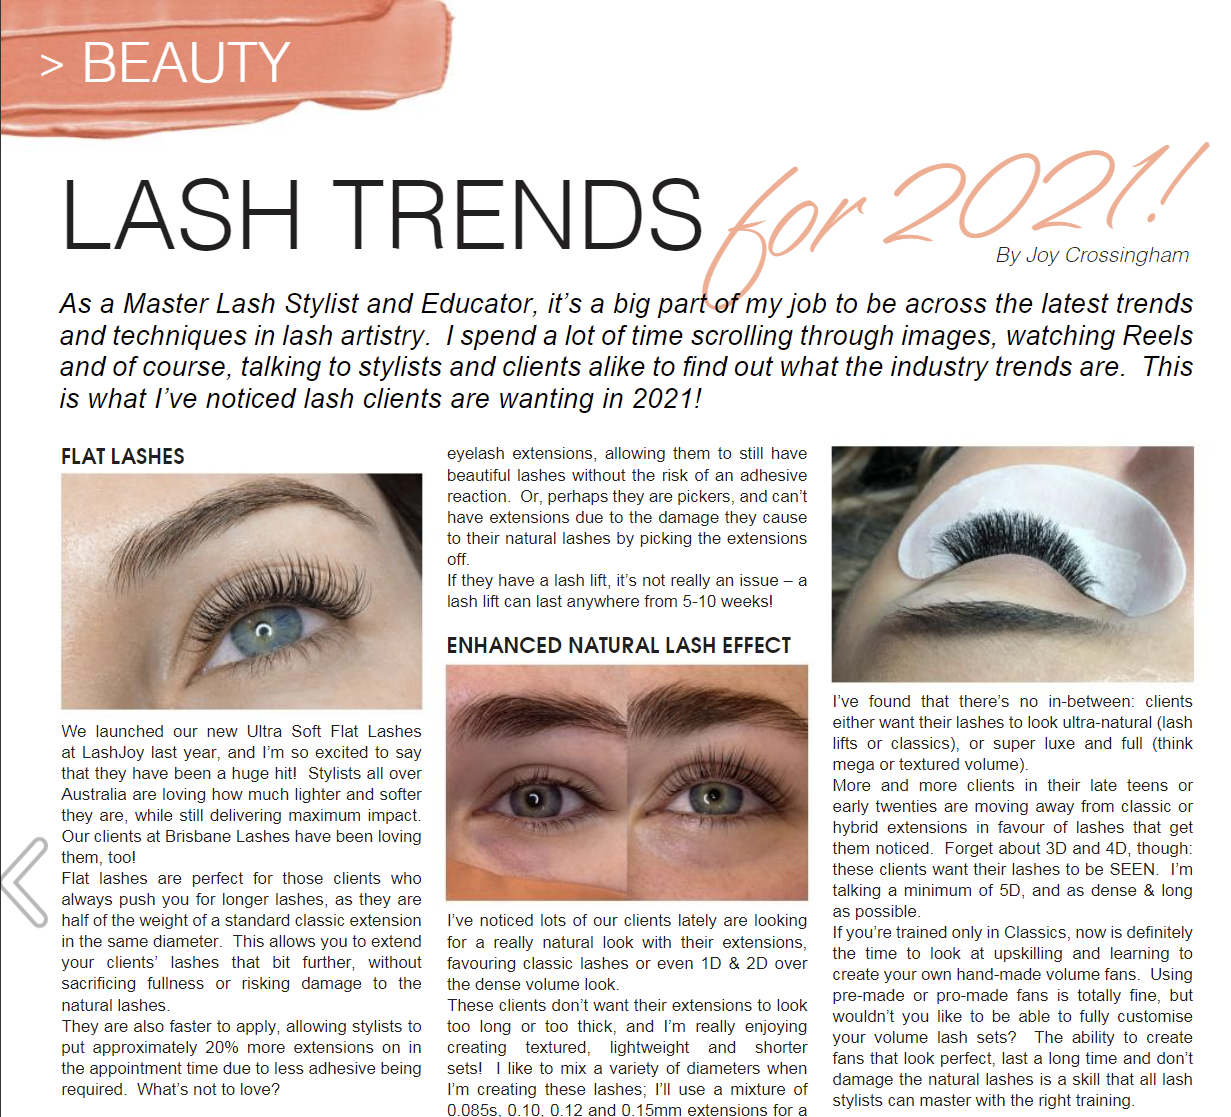 Lash Trends for 2021